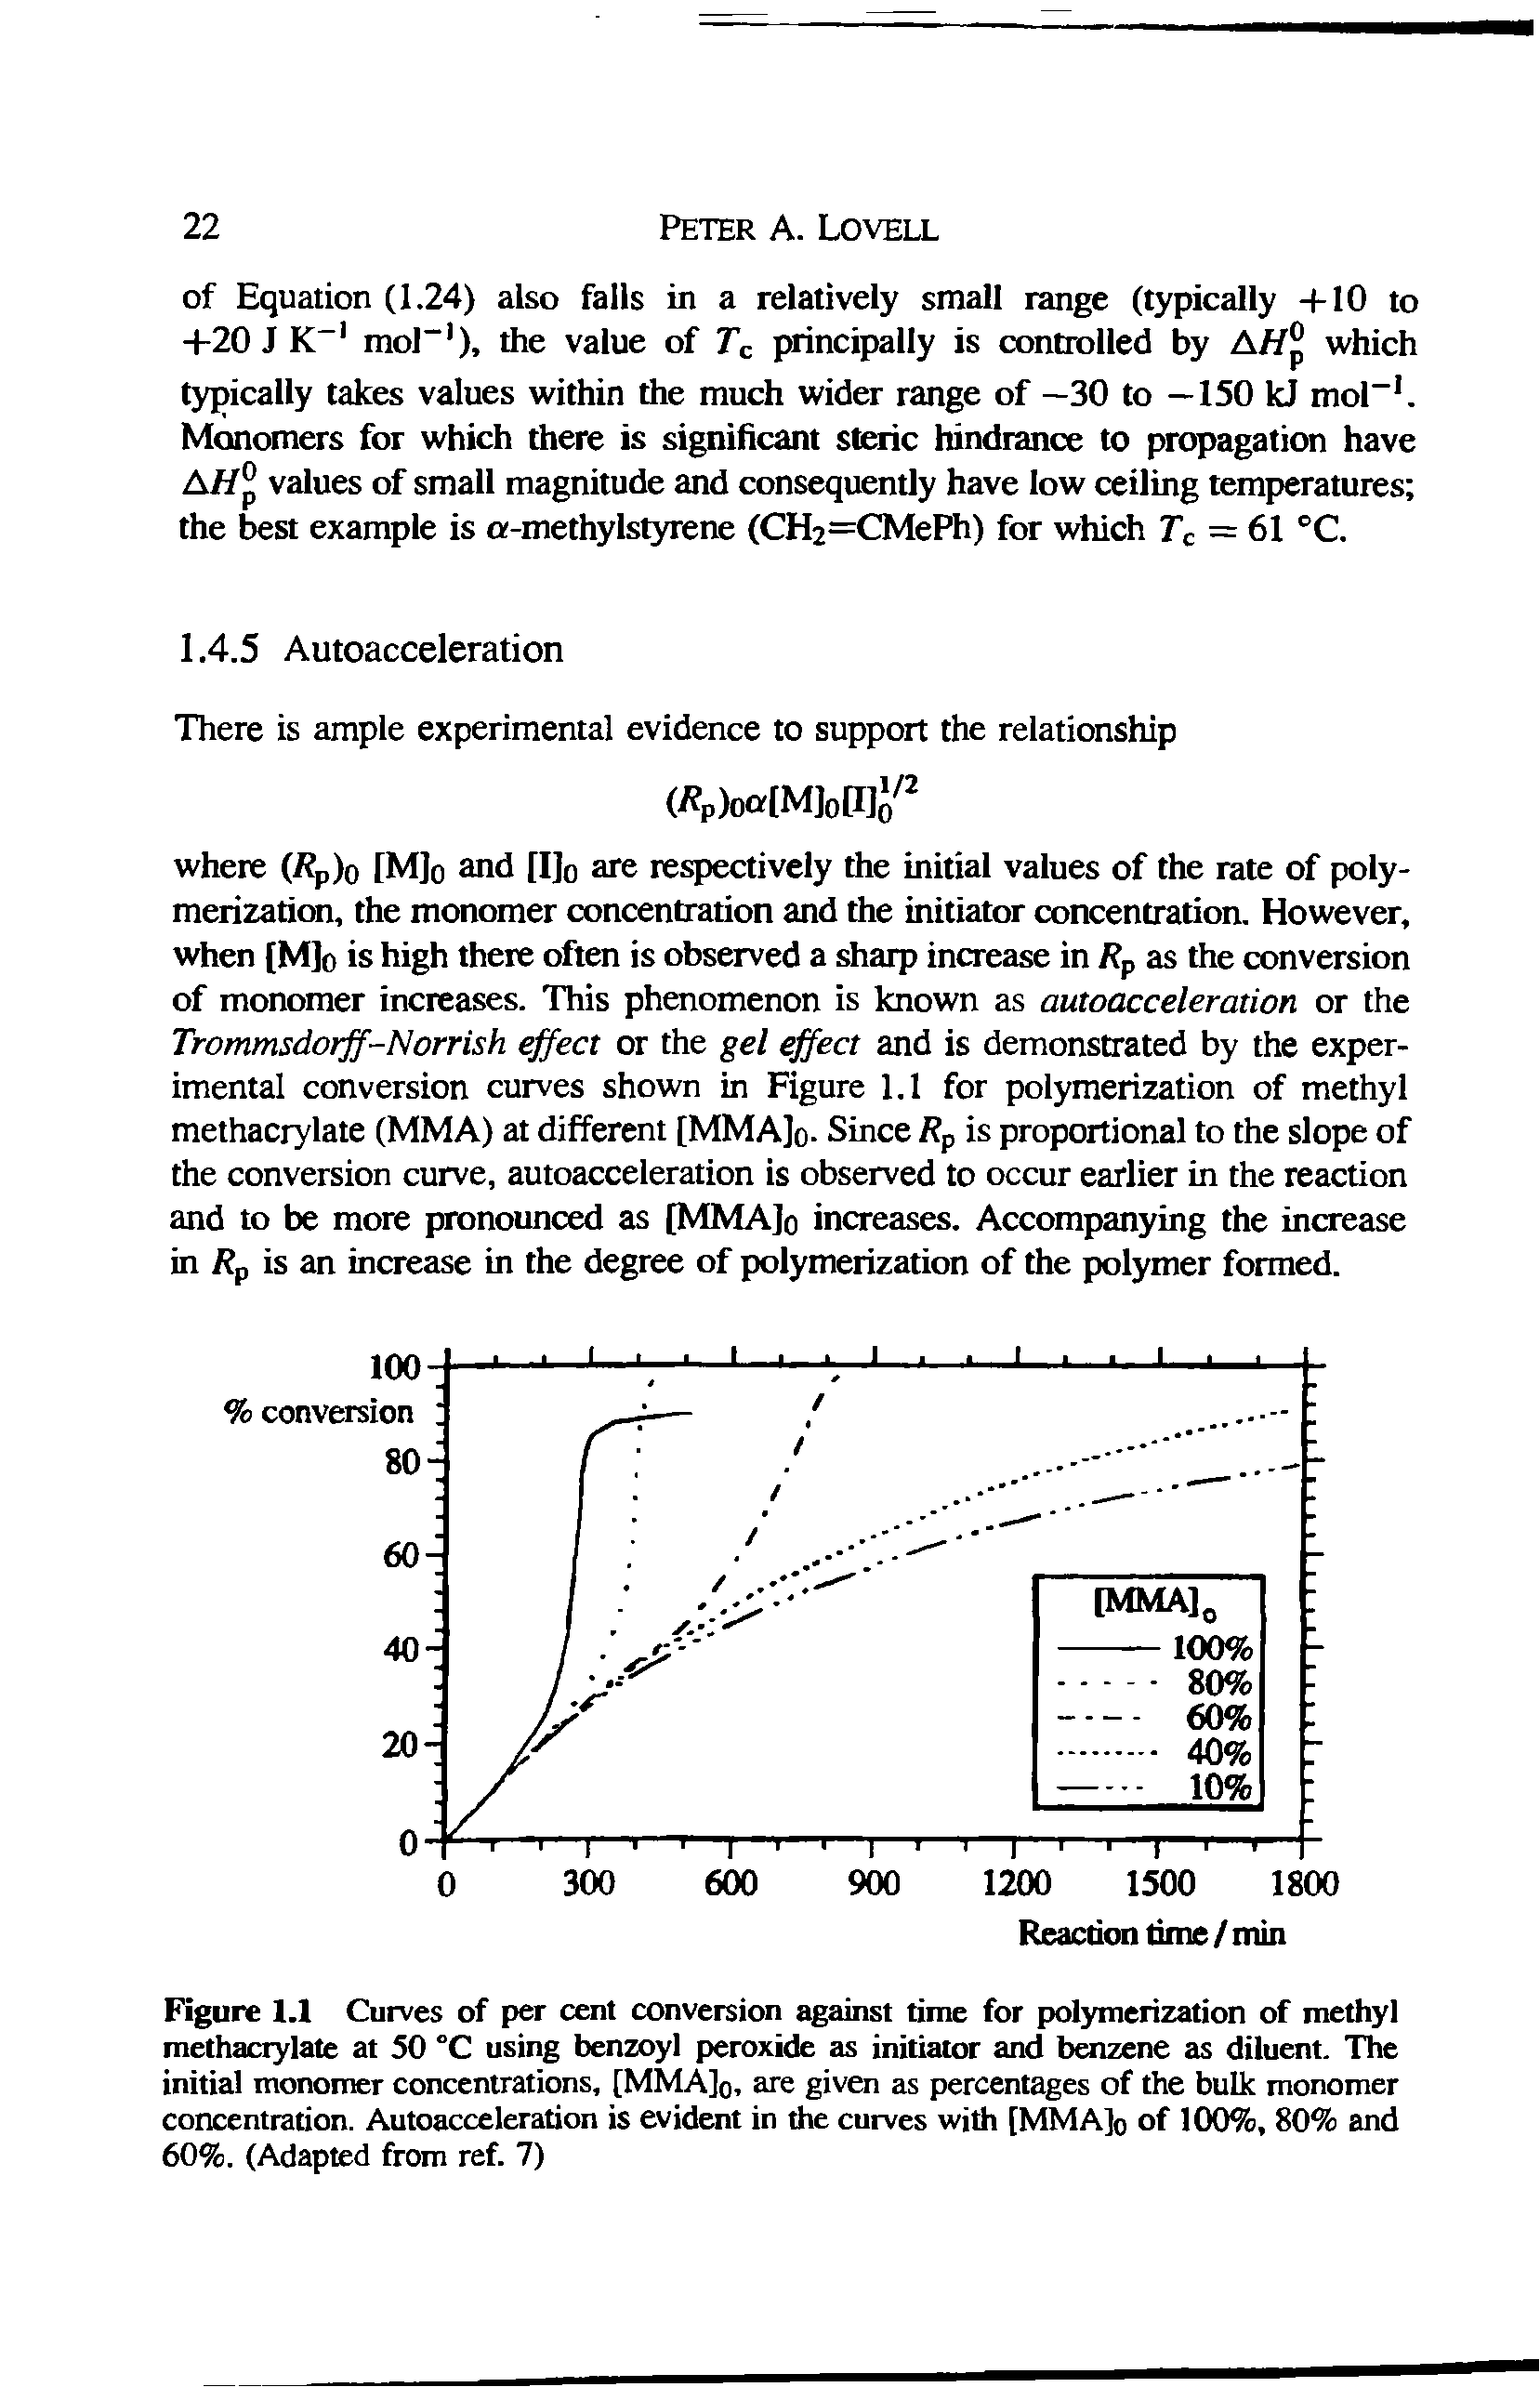 Figure 1.1 Curves of per cent conversion against time for polymerization of methyl methacrylate at 50 °C using benzoyl peroxide as initiator and benzene as diluent. The initial monomer concentrations, [MMA]q, are given as percentages of the bulk monomer concentration. Autoacceleration is evident in the curves with [MMA]o of 100%, 80% and 60%. (Adapted from ref. 7)...